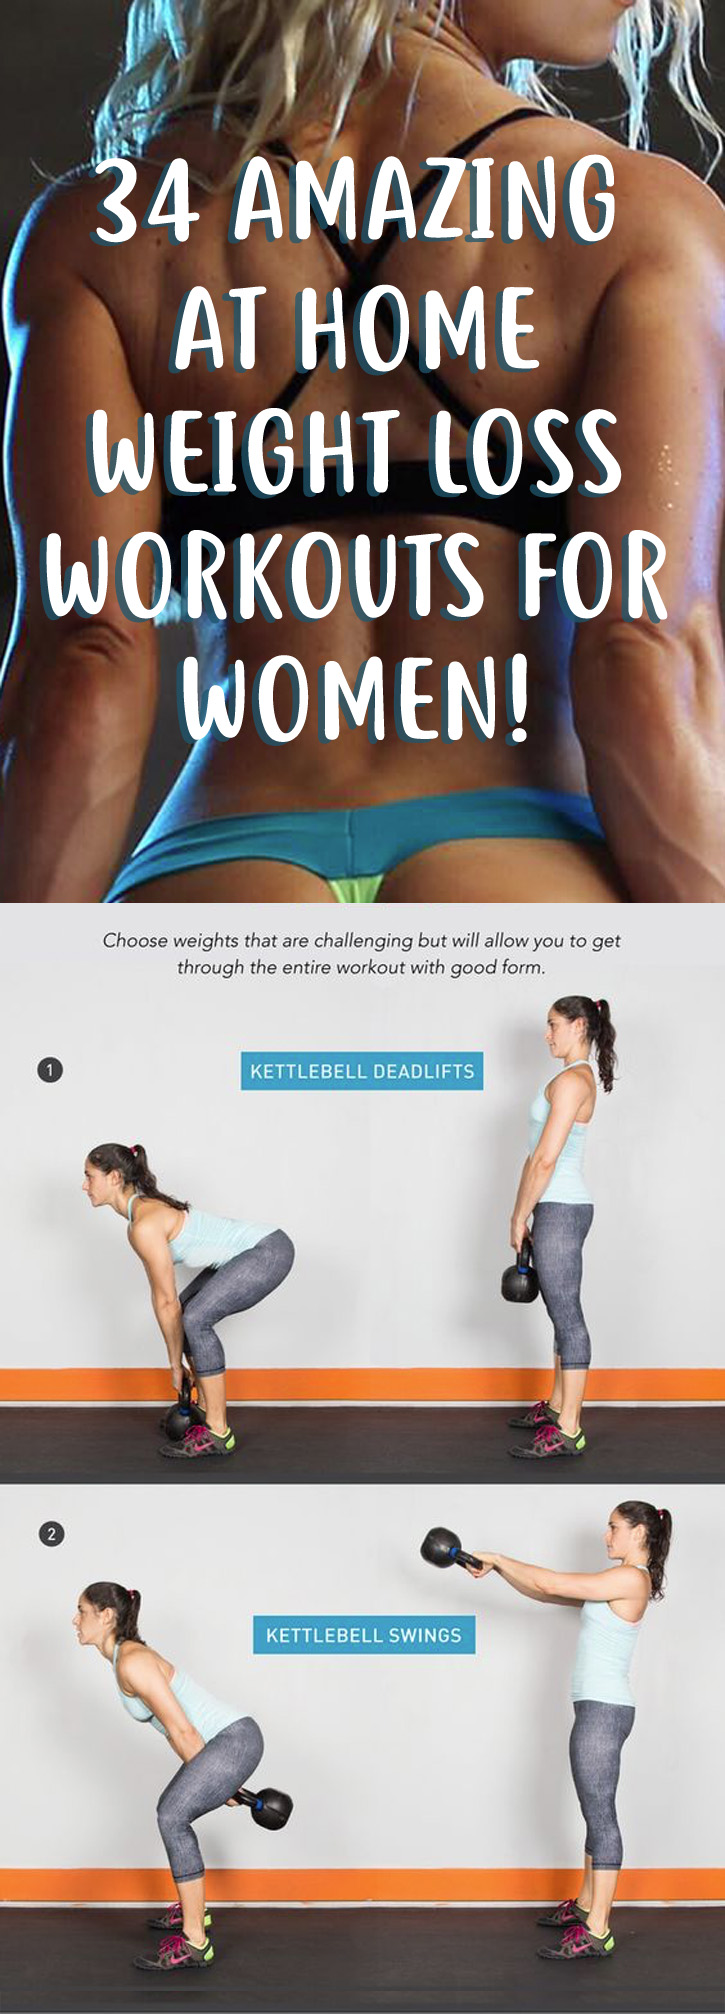 34 Amazing Weight Loss Workouts For